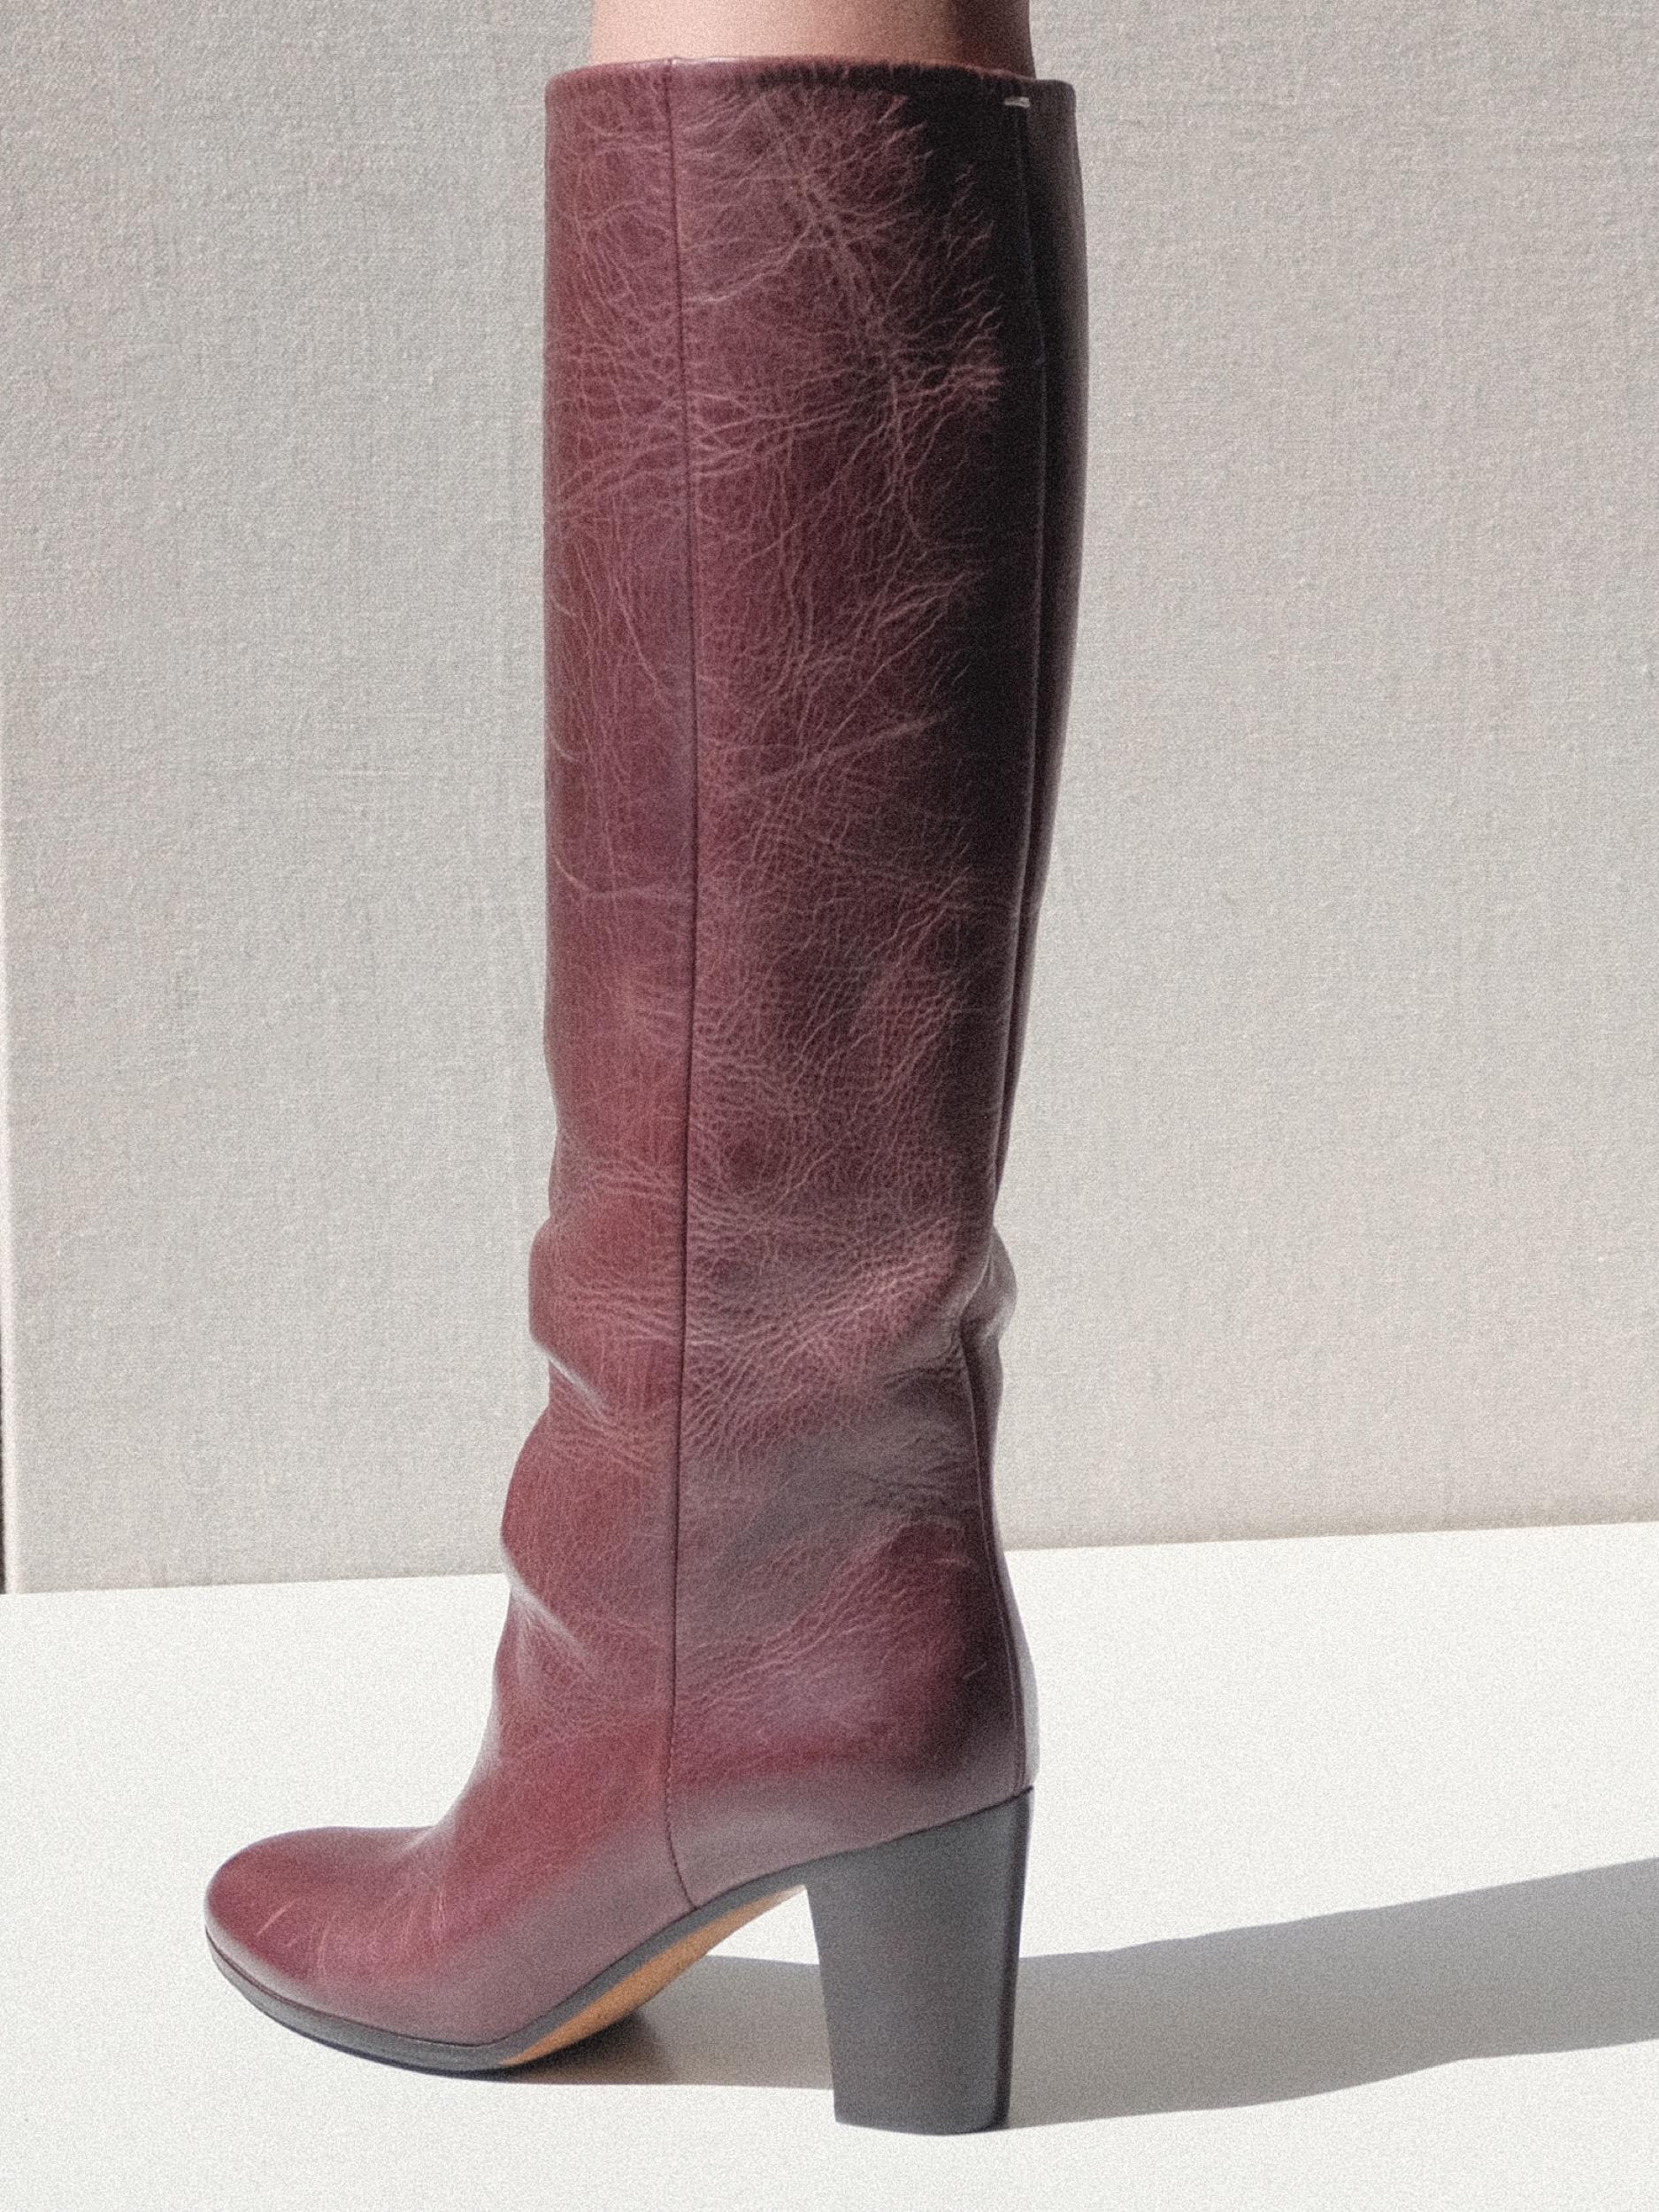 Martin Margiela Riding Boots Deep Red Size 37 Replica Line 22 For Sale 6